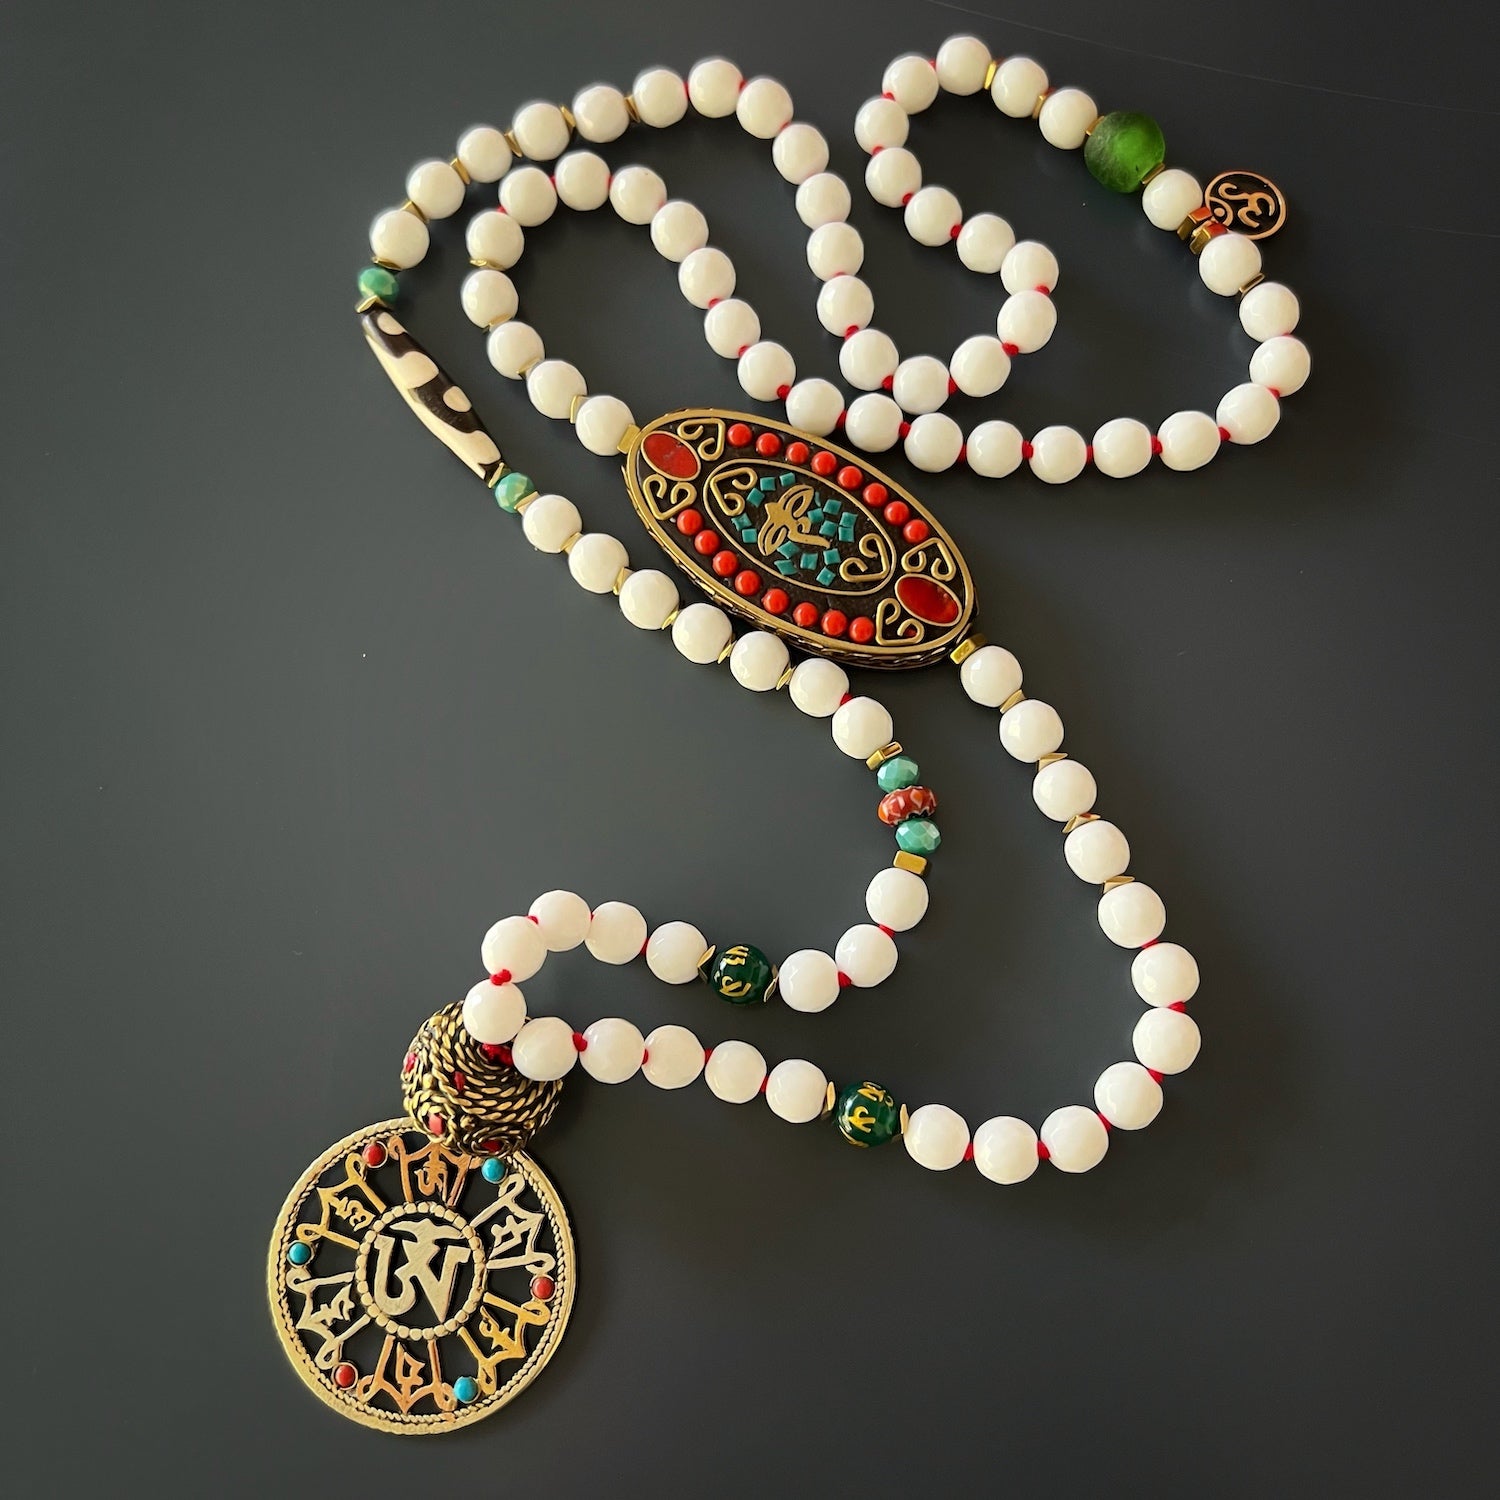 Talismanic Buddha Eye Necklace - Handmade jewelry with turquoise and coral stone accents, Nepal tube beads, and the sacred Om Mani Padme Hum mantra.